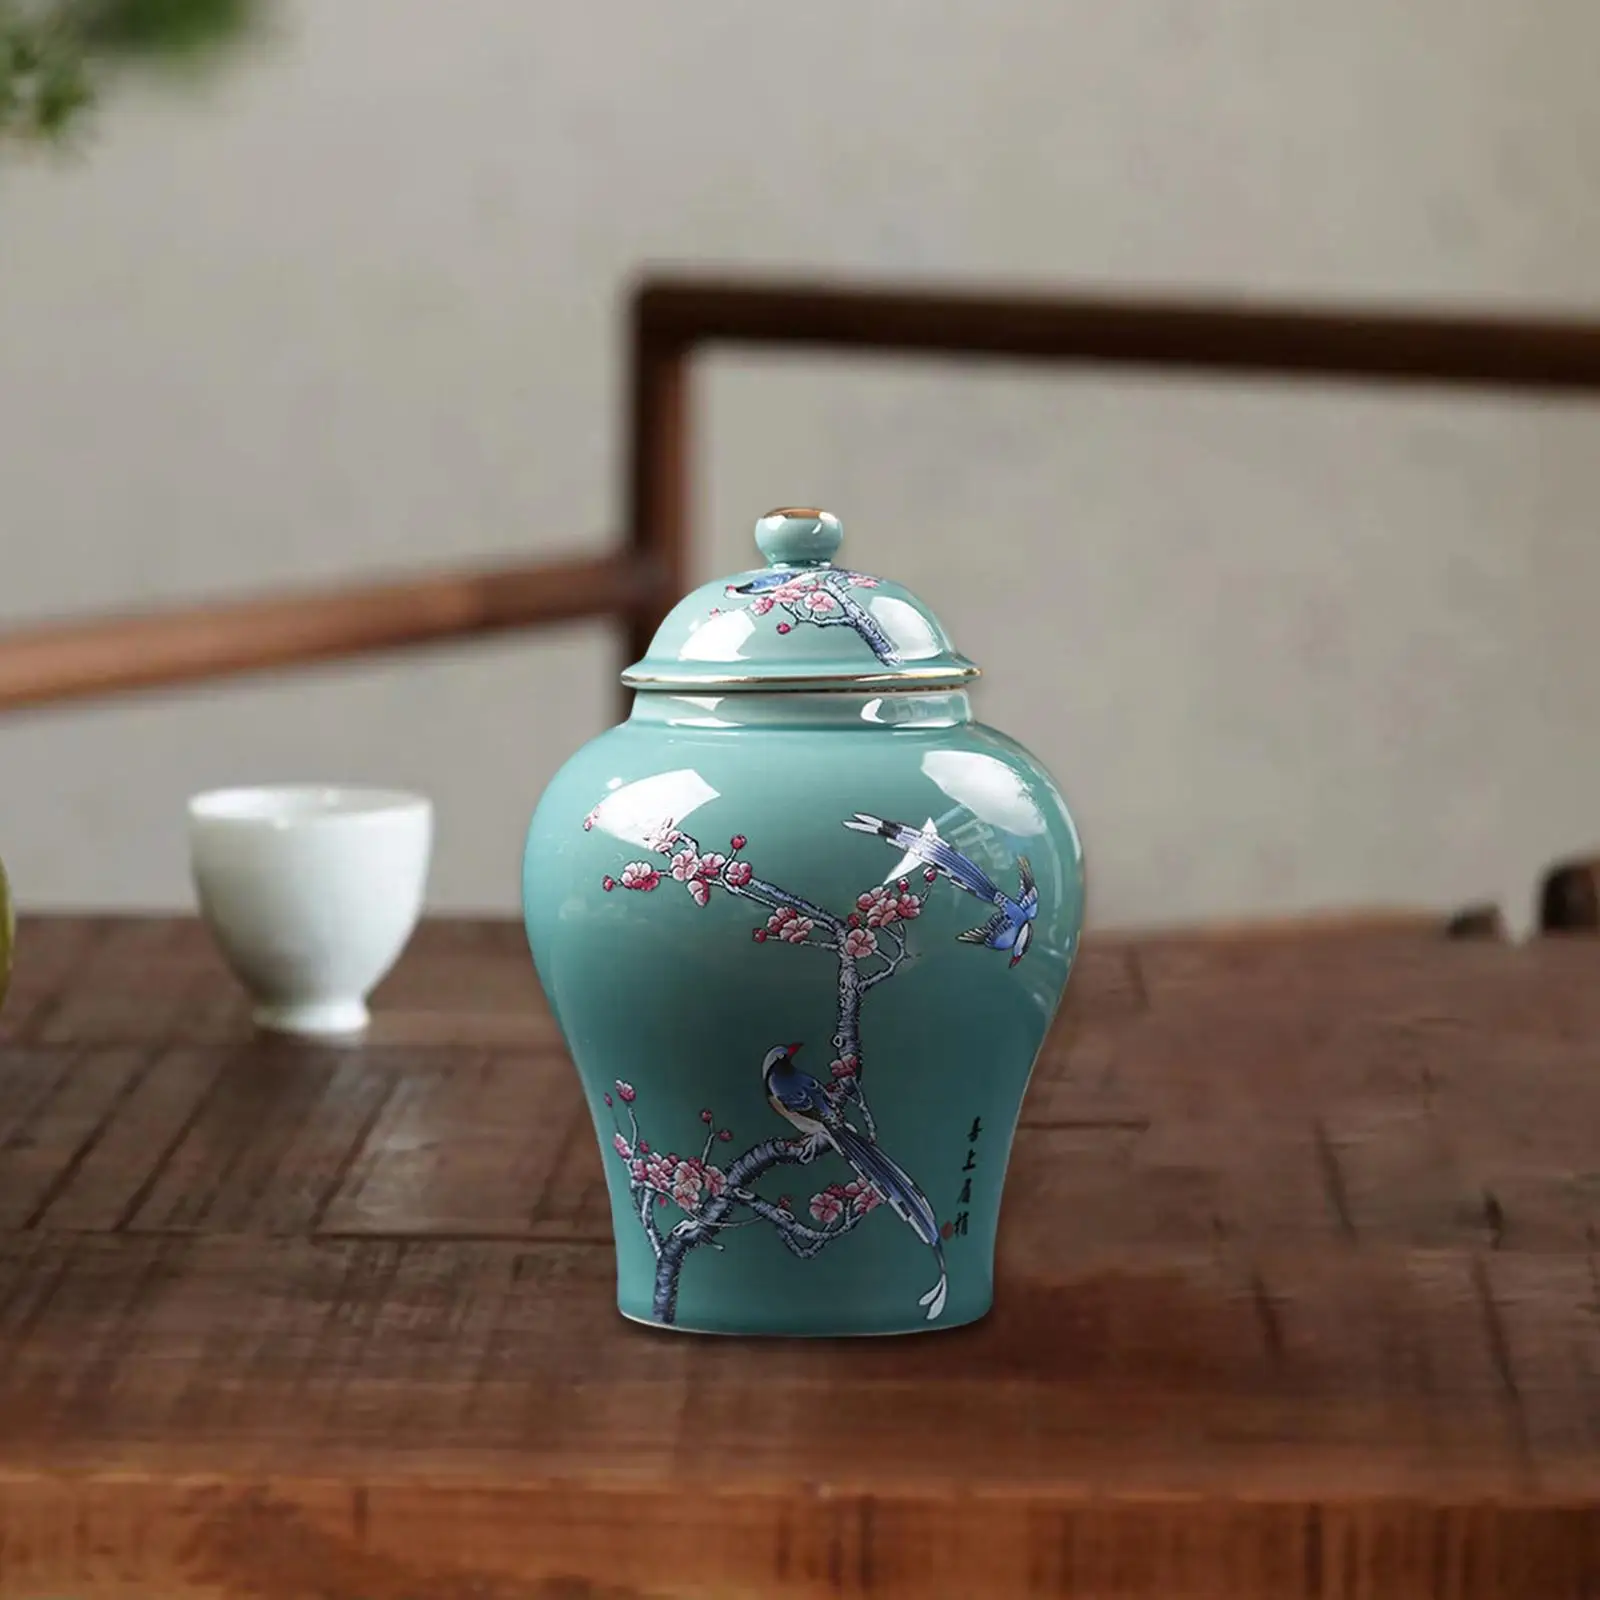 Painted Flower Ceramic Ginger Jar Gift with Airtight Lid Chinese Style Multiuse Table Decorative Jar Storage Jars for Loose Tea